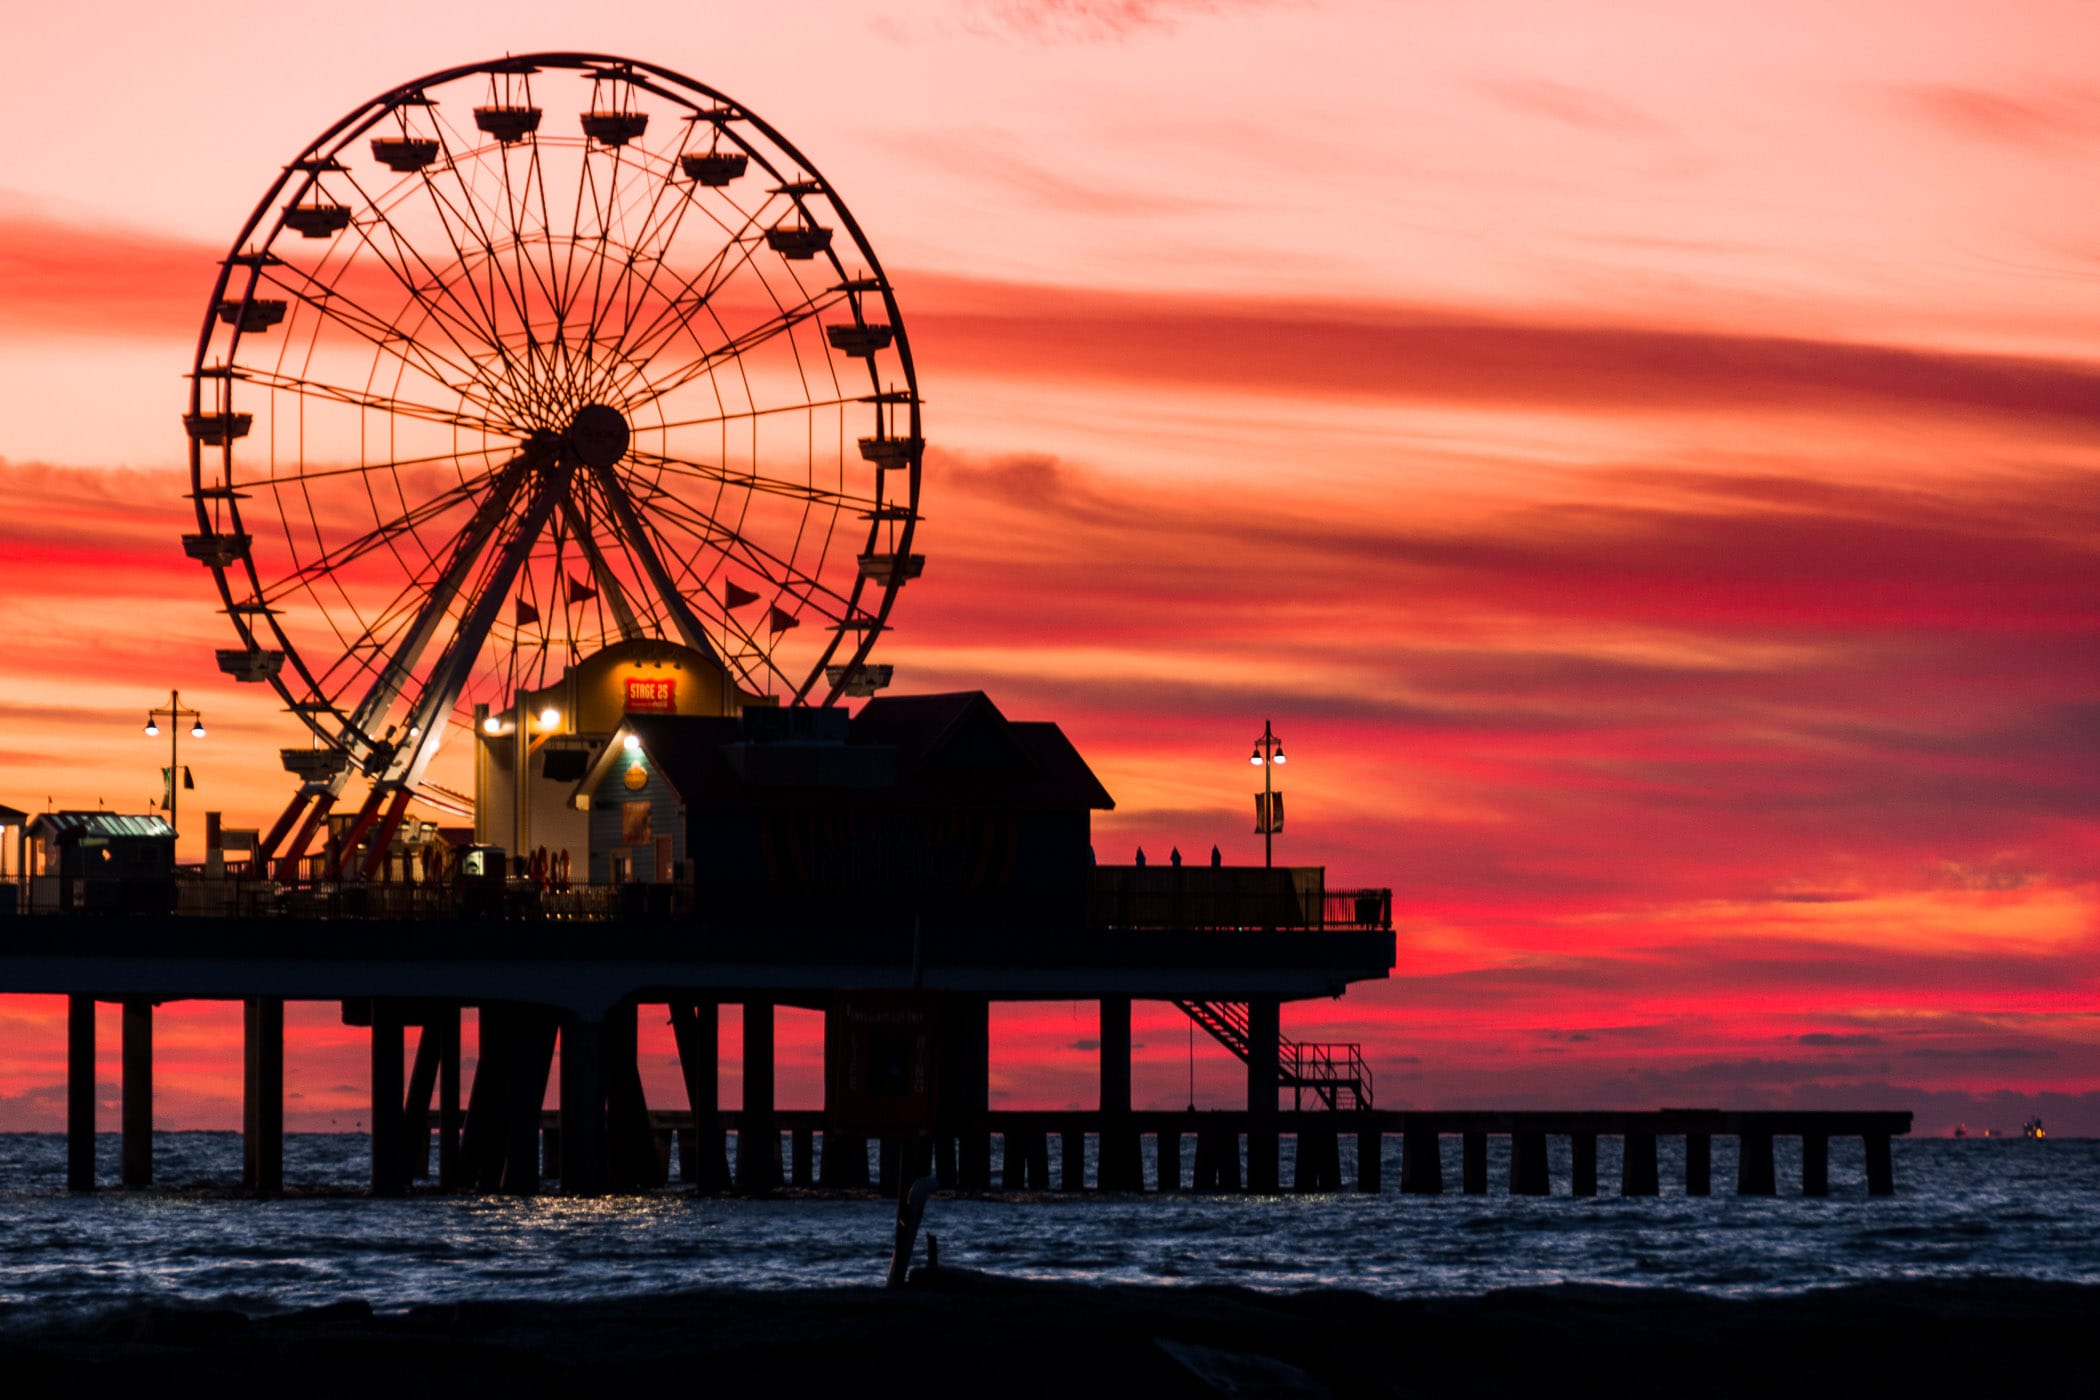 The light of the rising sun silhouettes the Historic Galveston Pleasure Pier as day breaks over the Gulf of Mexico.